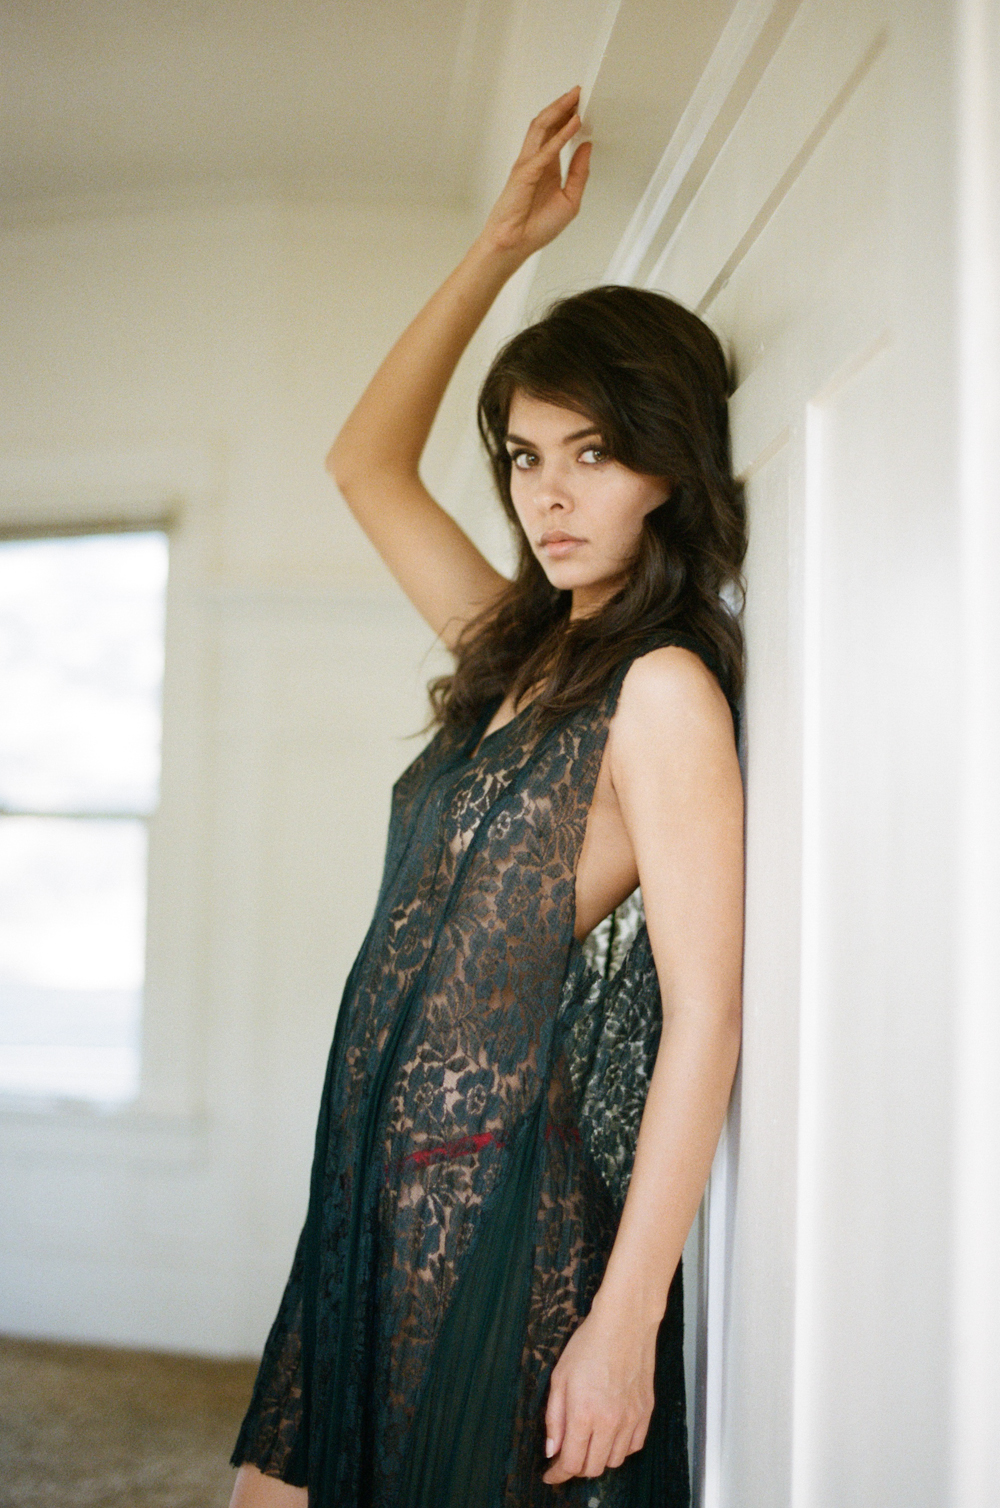 Black lace dress in a bohemian boudoir session by Briana Morrison